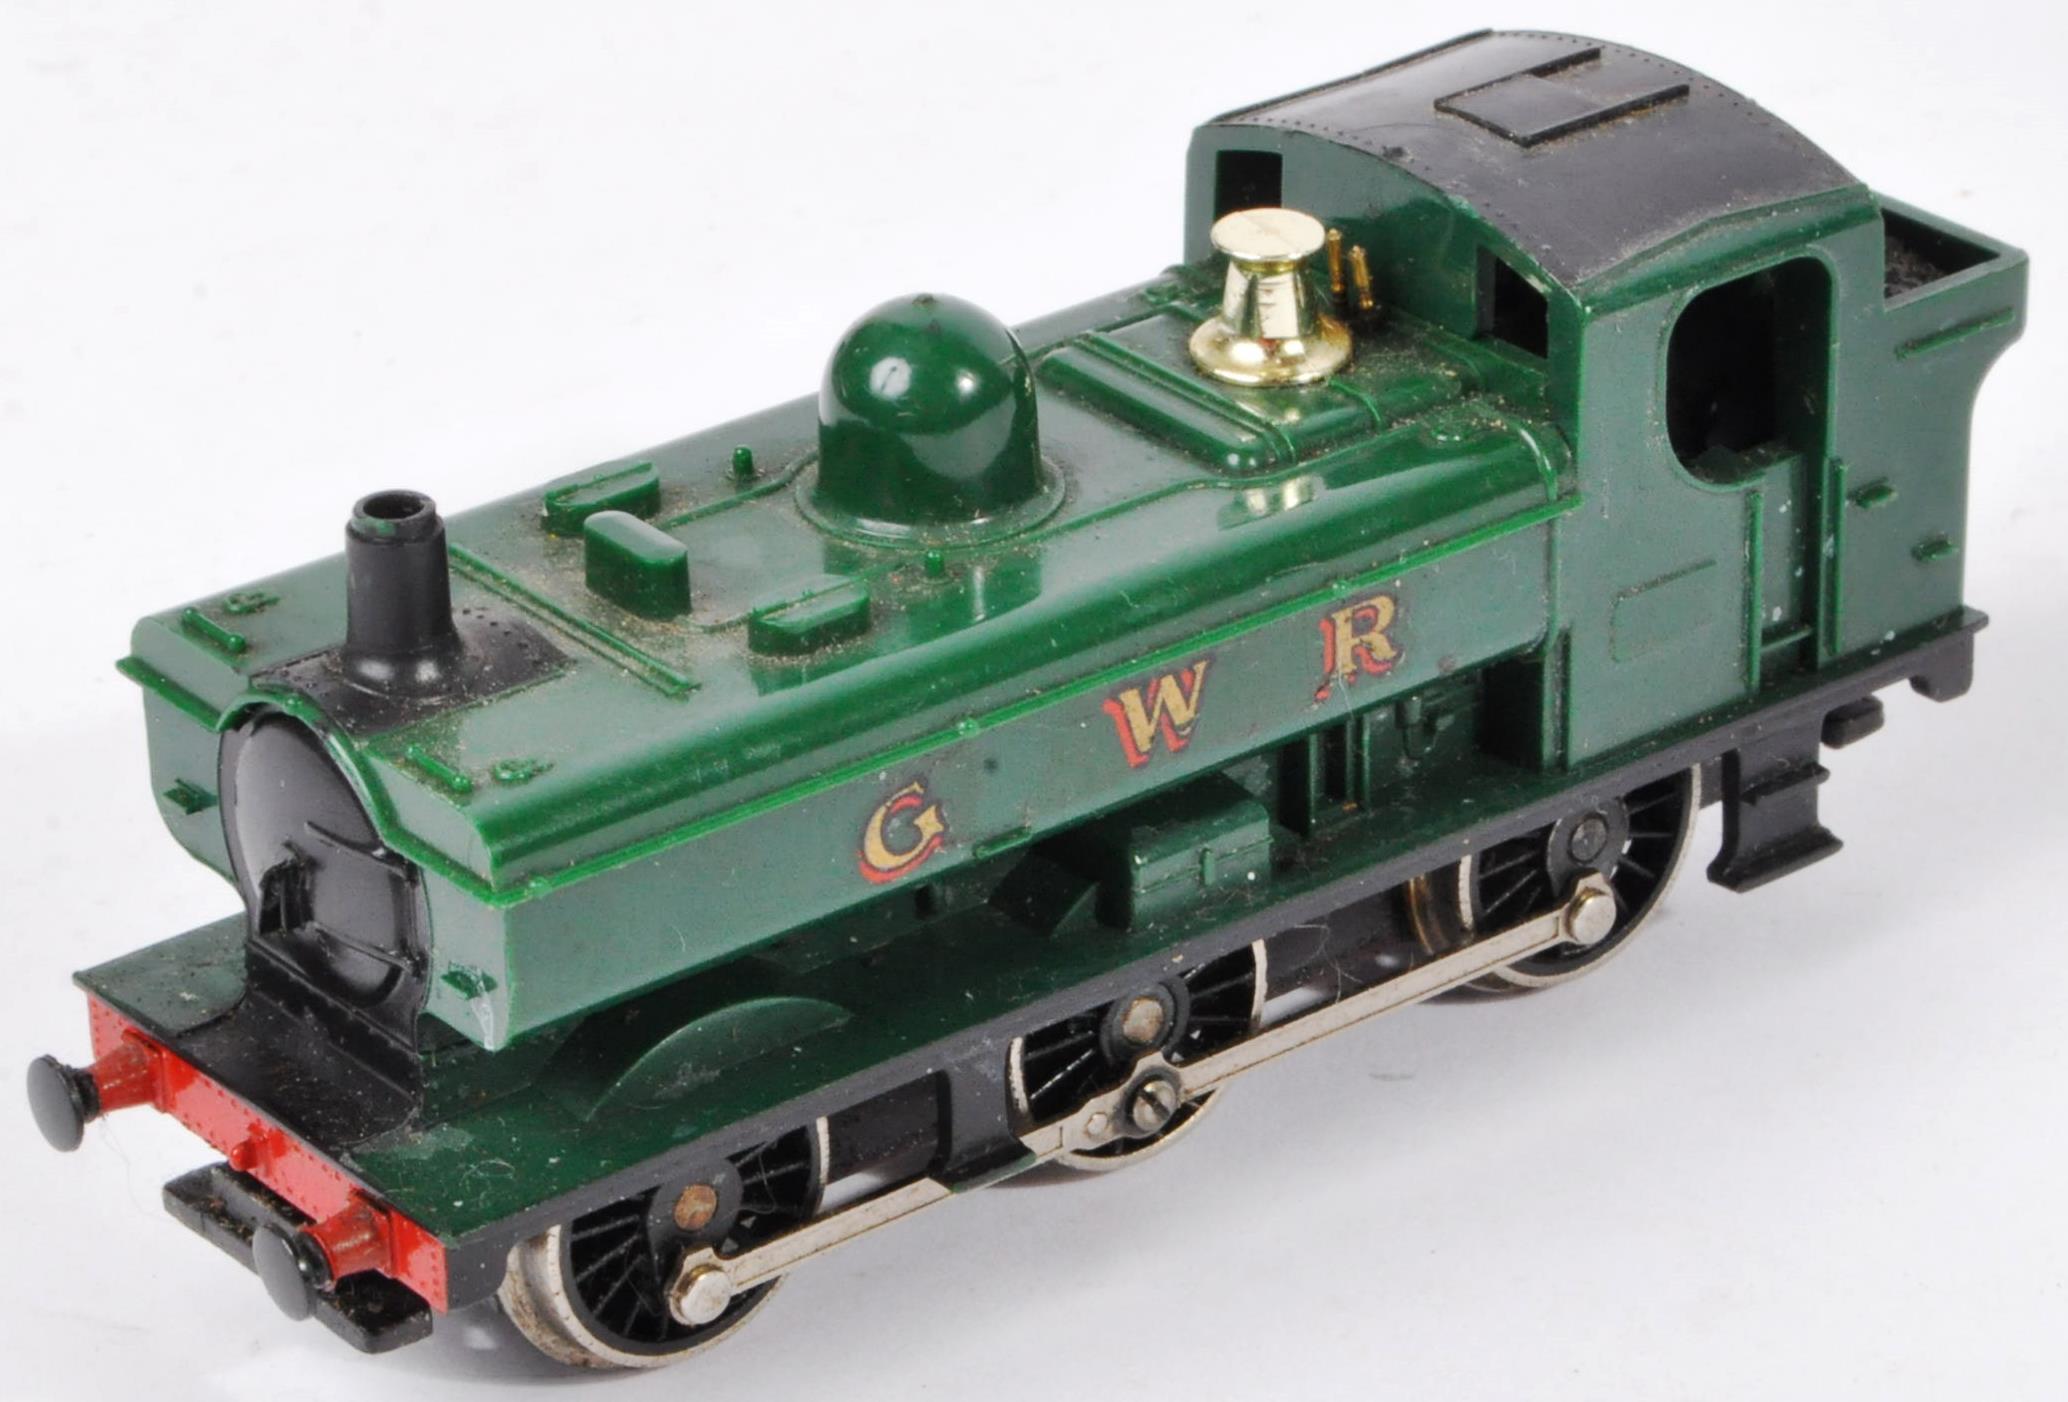 COLLECTION OF HORNBY / TRIANG TRAIN SET LOCOMOTIVE ENGINES - Image 2 of 8